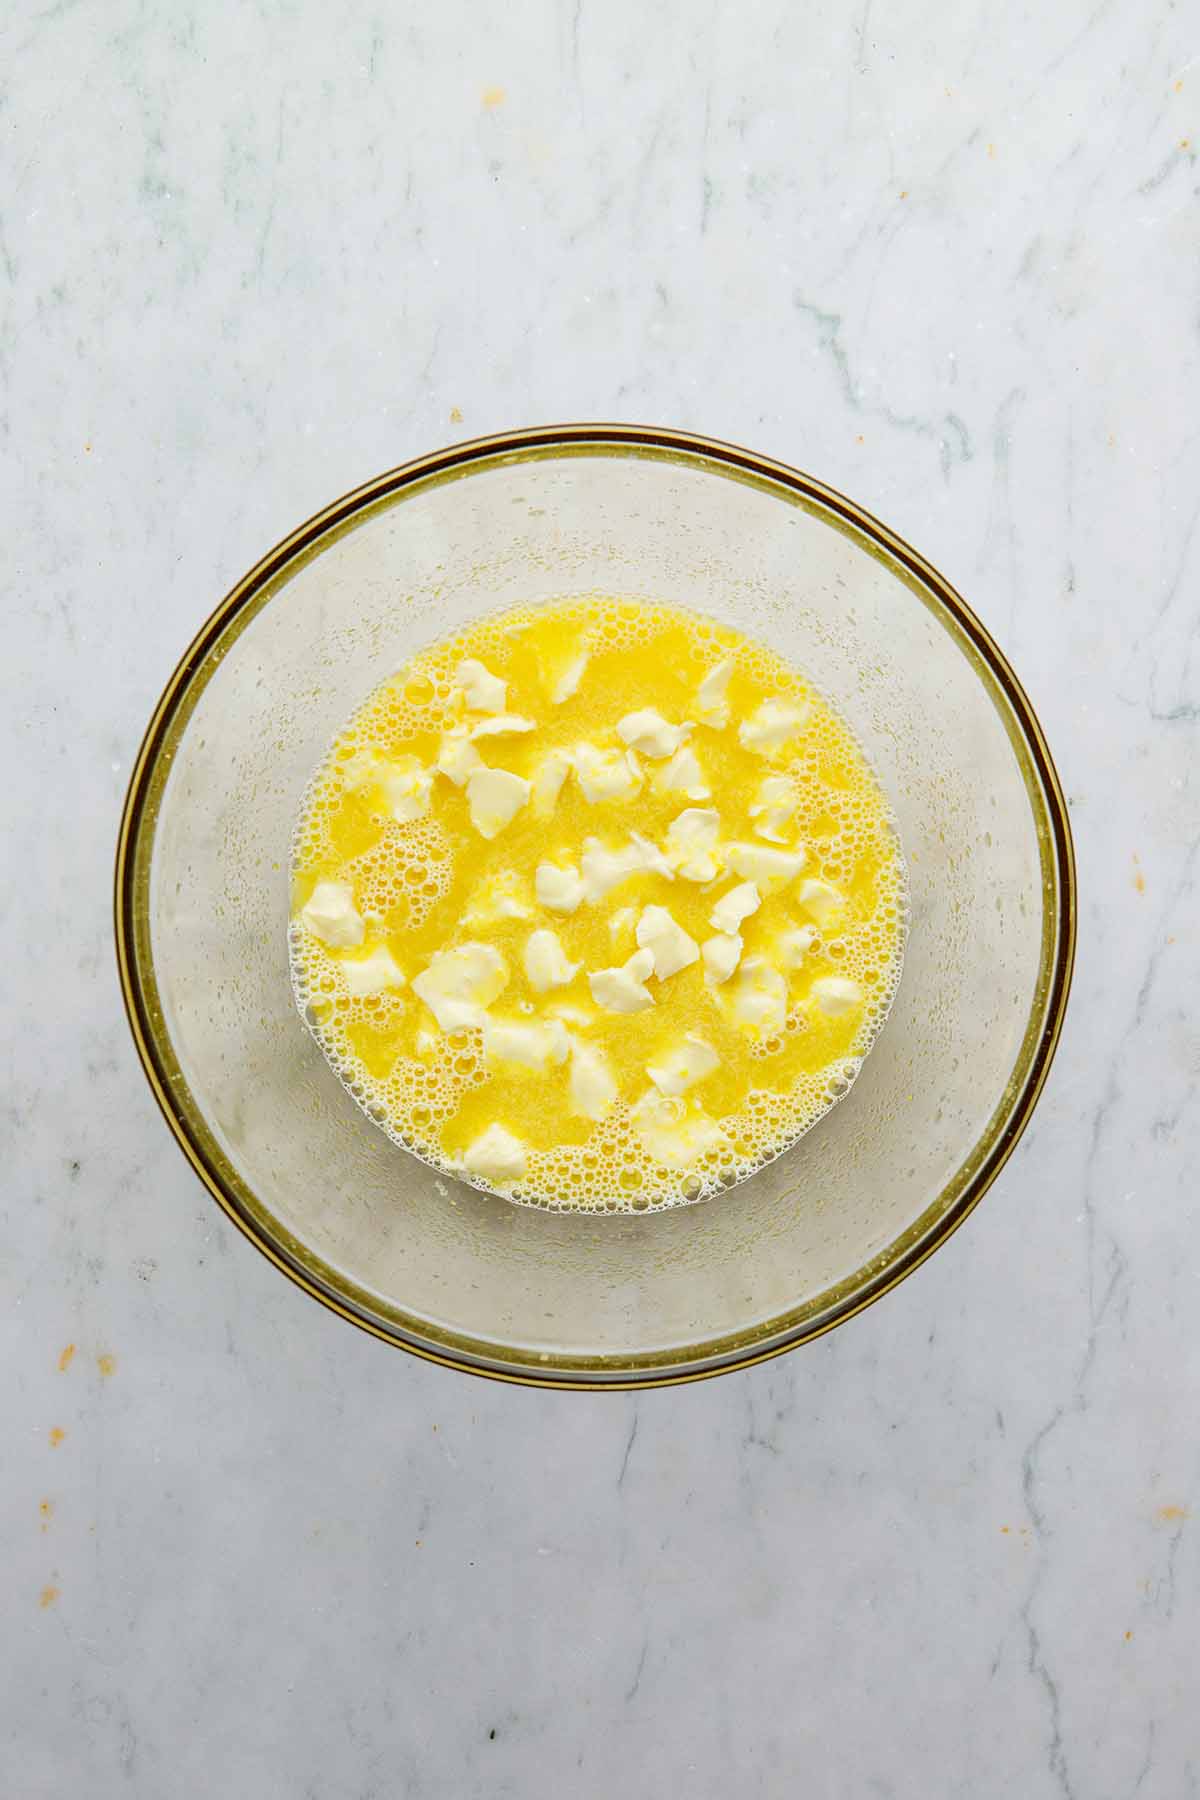 Whisked eggs, sugar, and lemon with small bit of butter floating on top in a large glass bowl.